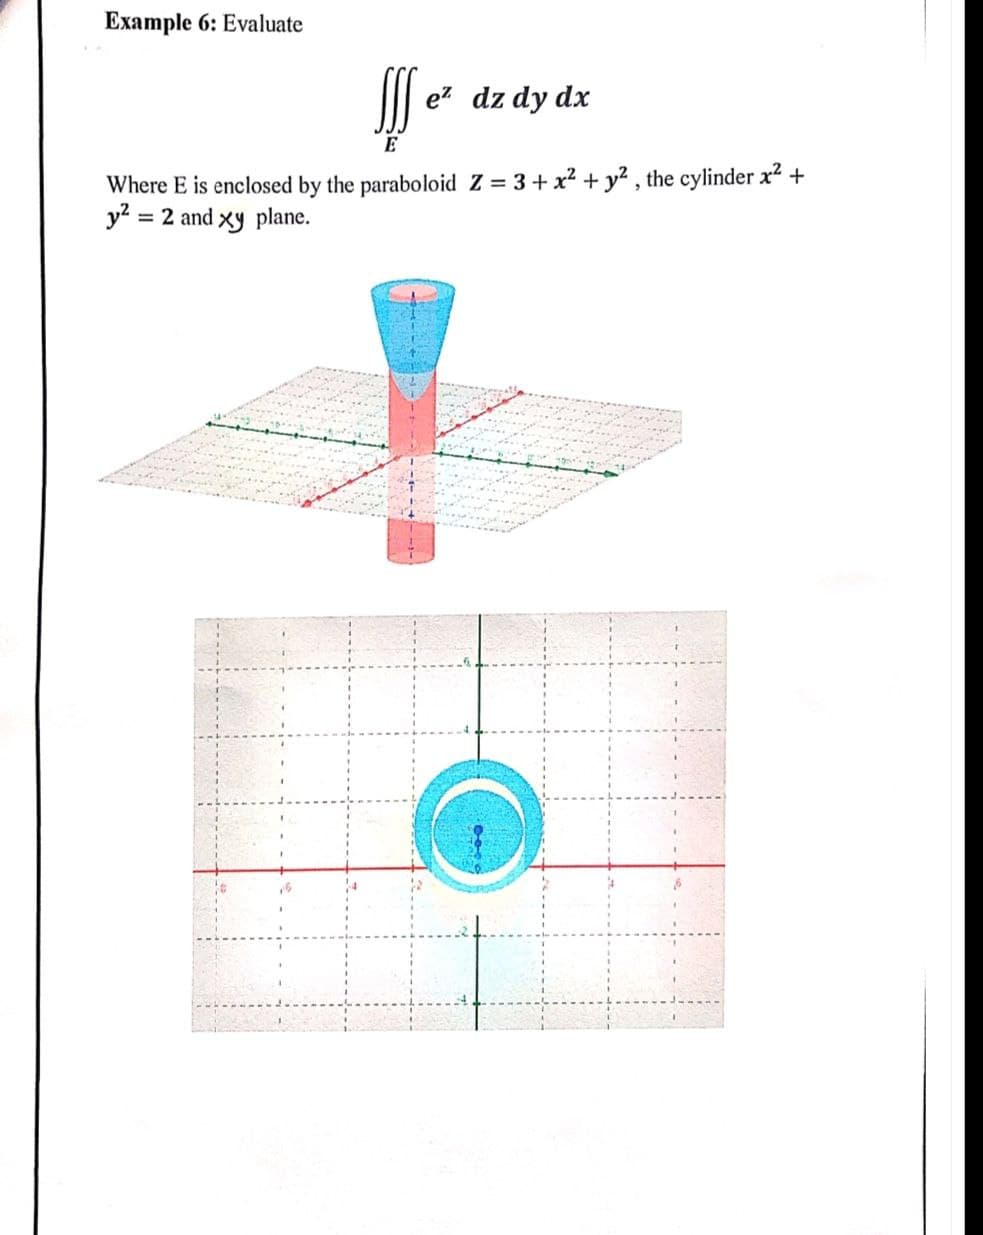 Example 6: Evaluate
ez dz dy dx
E
Where E is enclosed by the paraboloid Z = 3+ x? + y² , the cylinder x? +
y? = 2 and xy plane.
